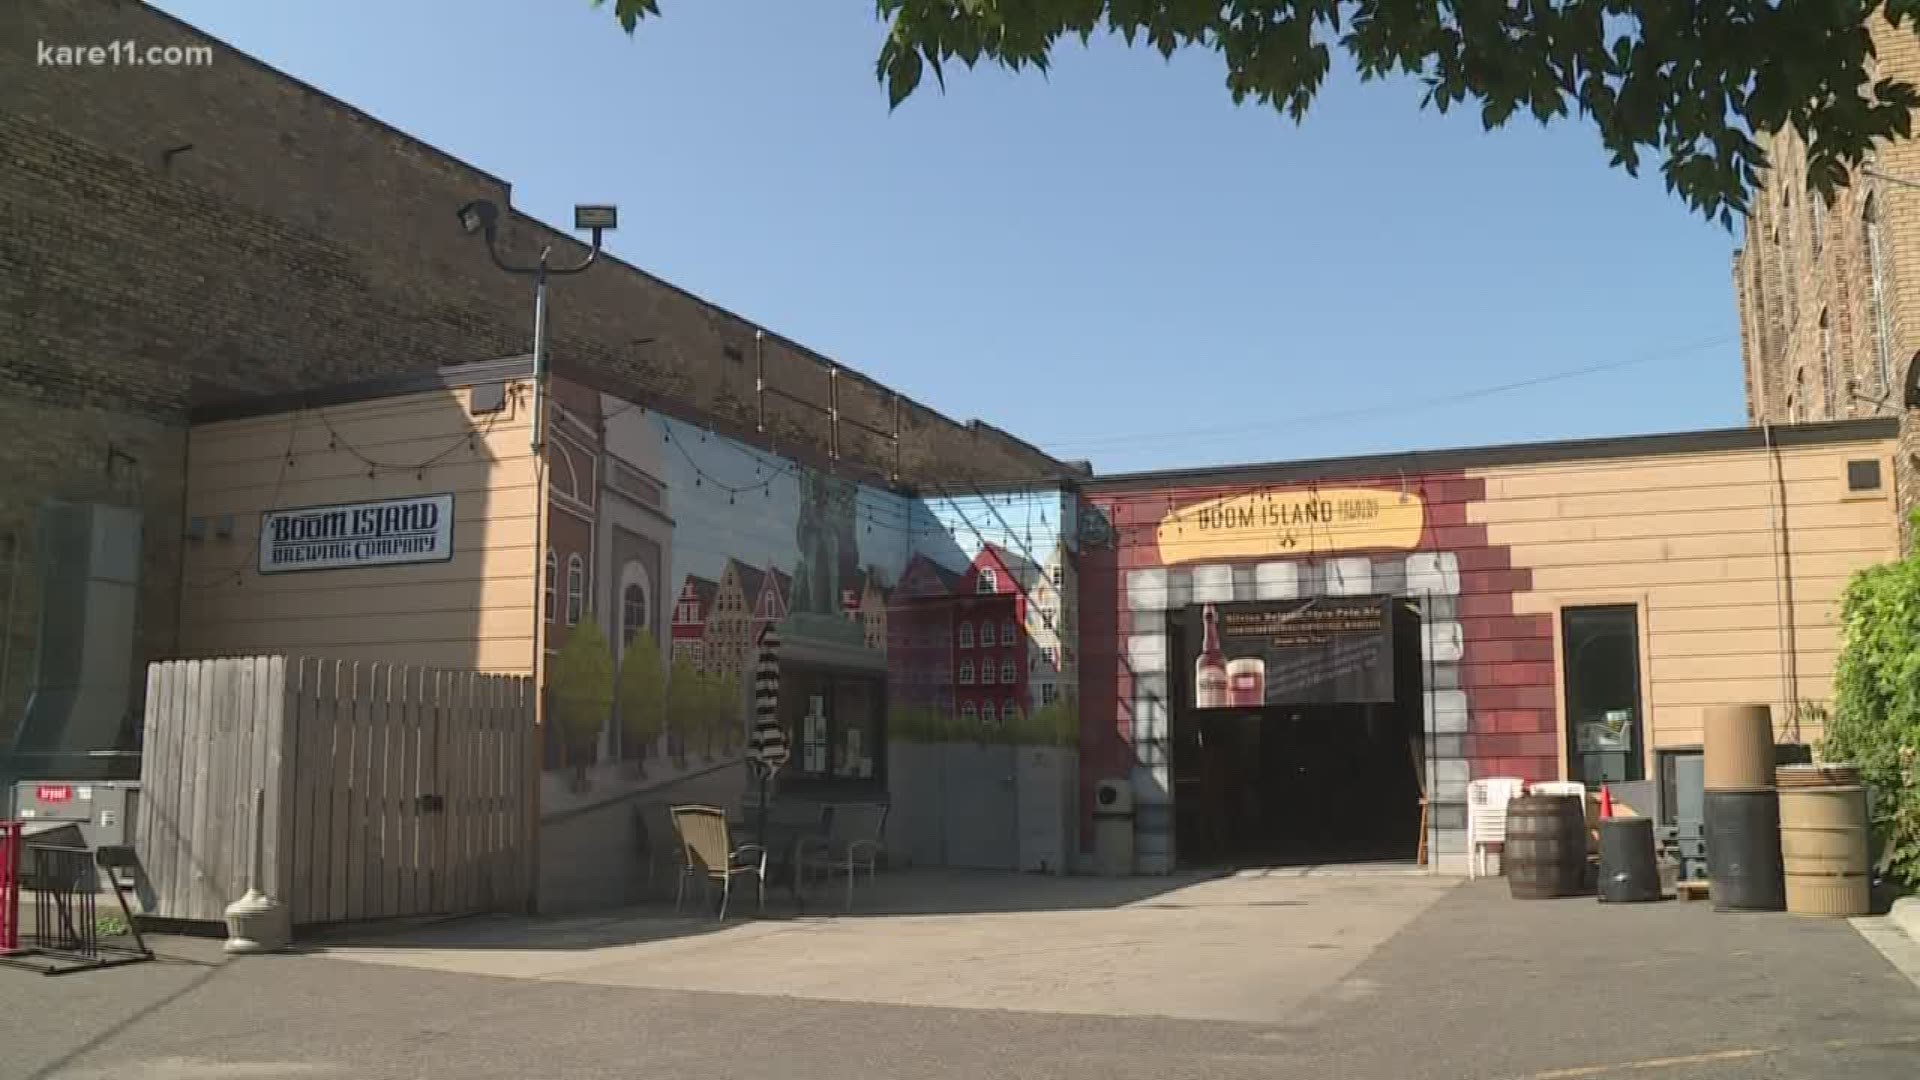 Boom Island Brewing's owner says he's relocating after a nearby shooting on Friday night in North Minneapolis, but community organizers say they're making progress in the neighborhood. https://kare11.tv/2O6oZ2D